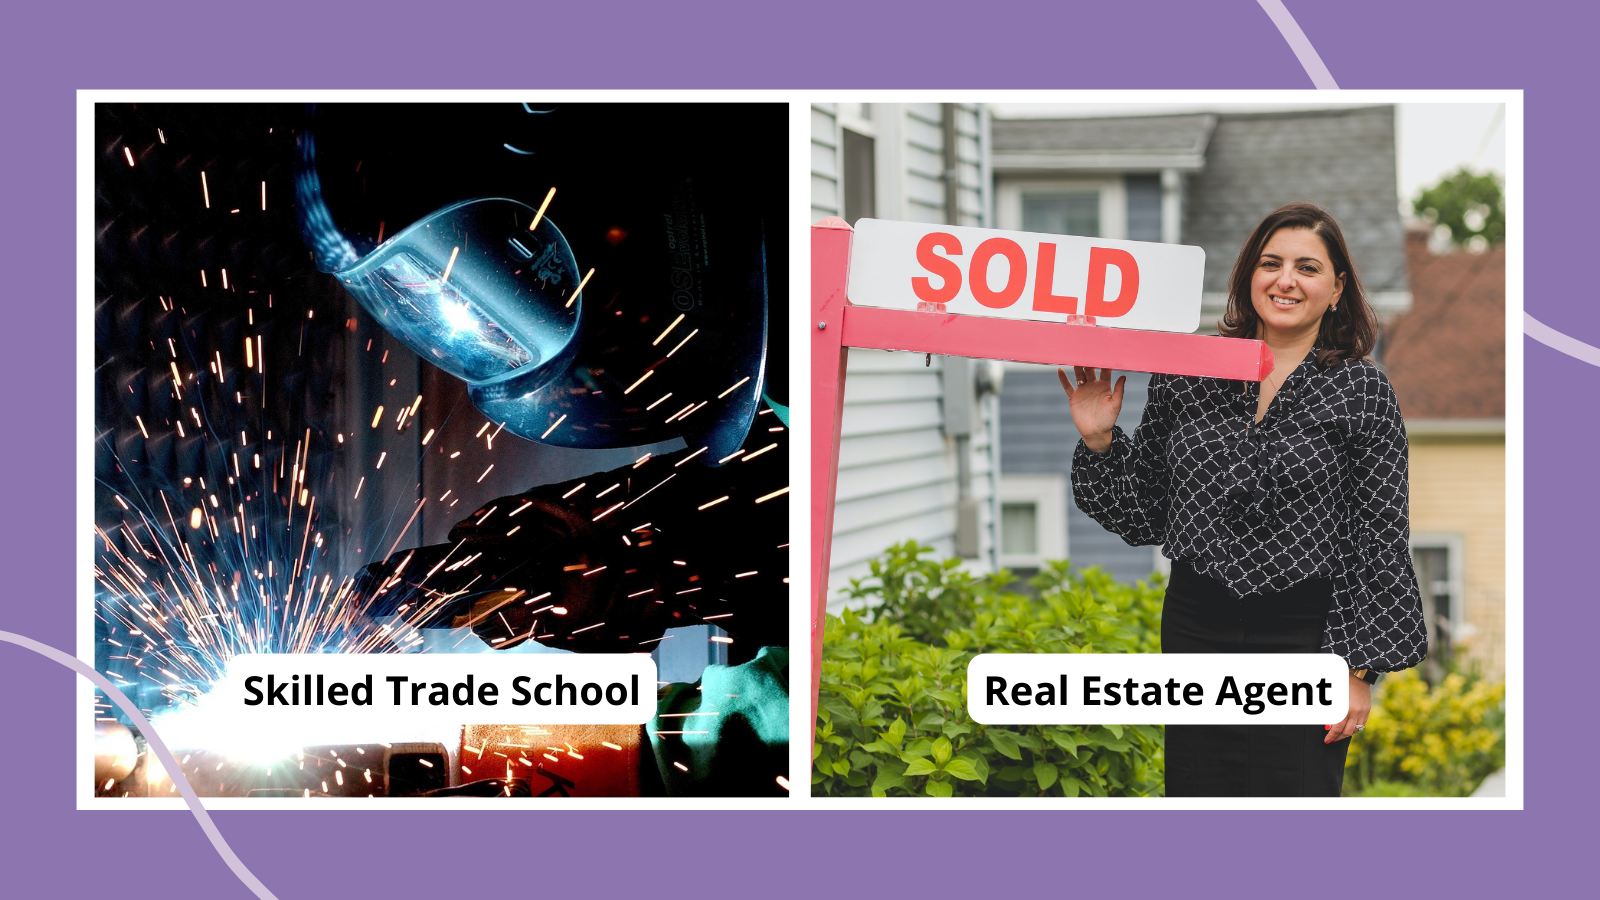 Collage of alternatives to college, including skilled trade school and real estate agent